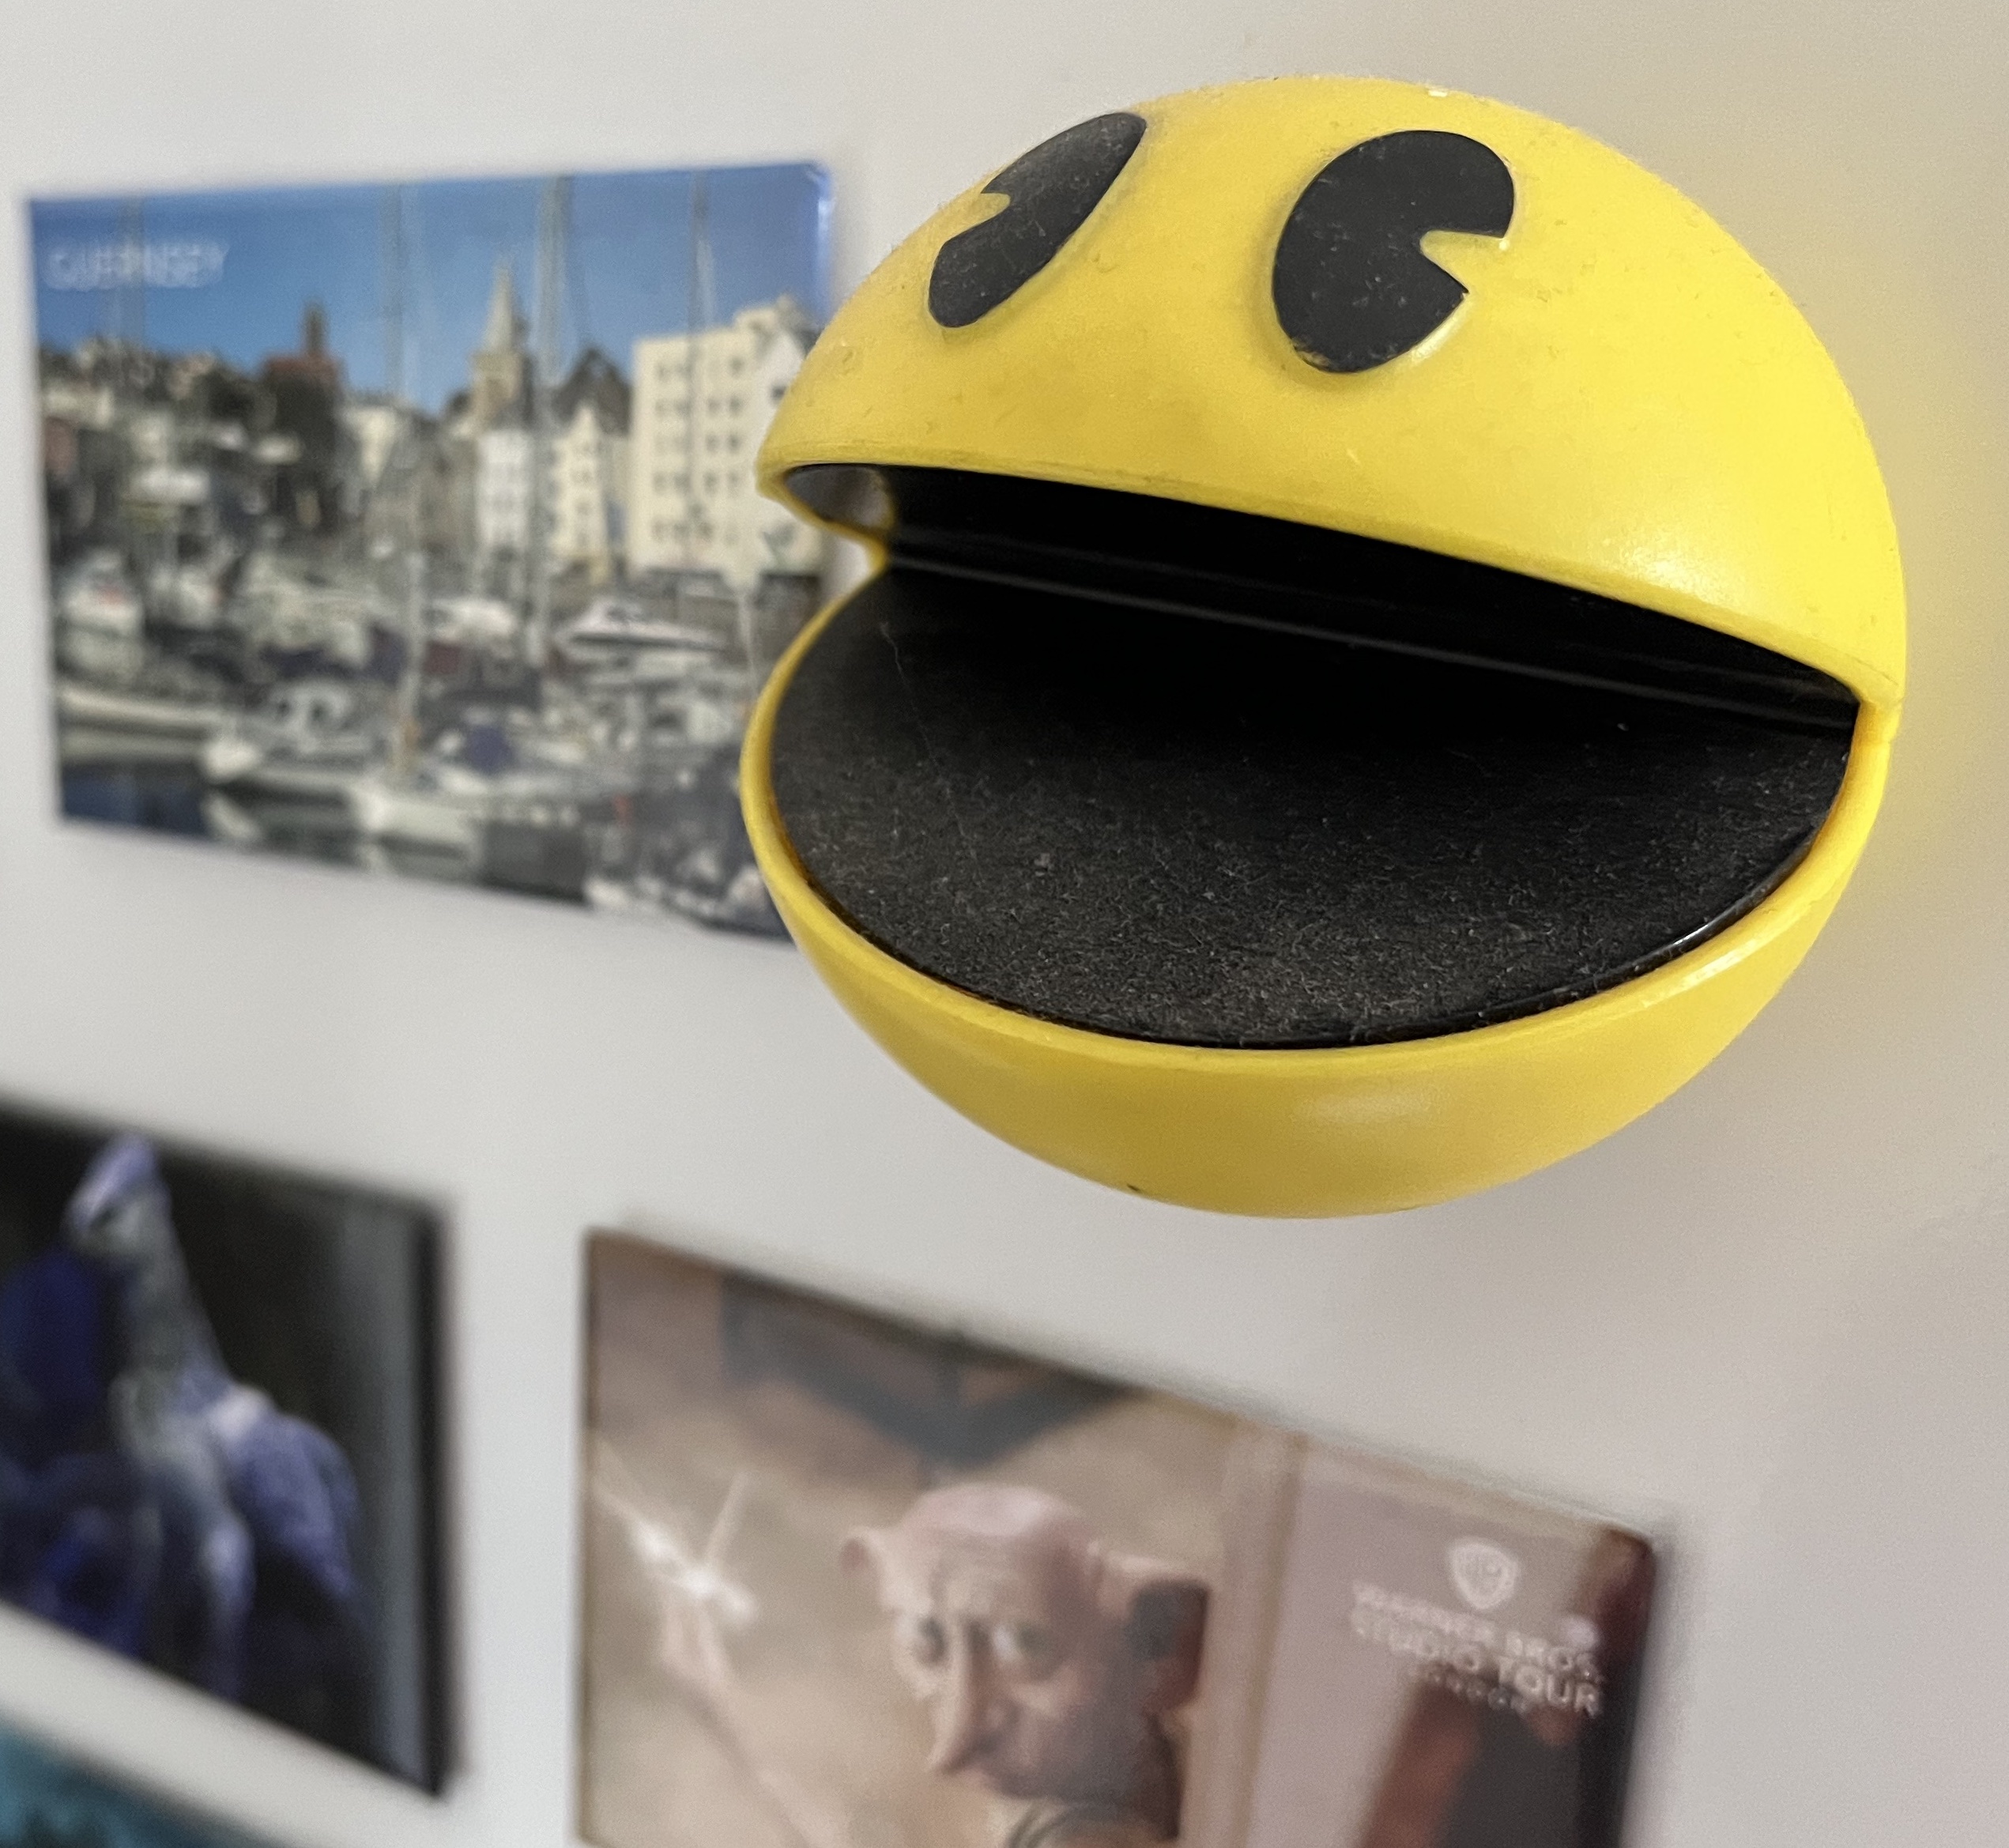 A fridge magnet in the shape of Pac-man. The magnet is a yellow ball that sticks out beyond the flat magnets next to it. It has a large black wide open mouth across its width, and a couple of black coloured eyes just above it.